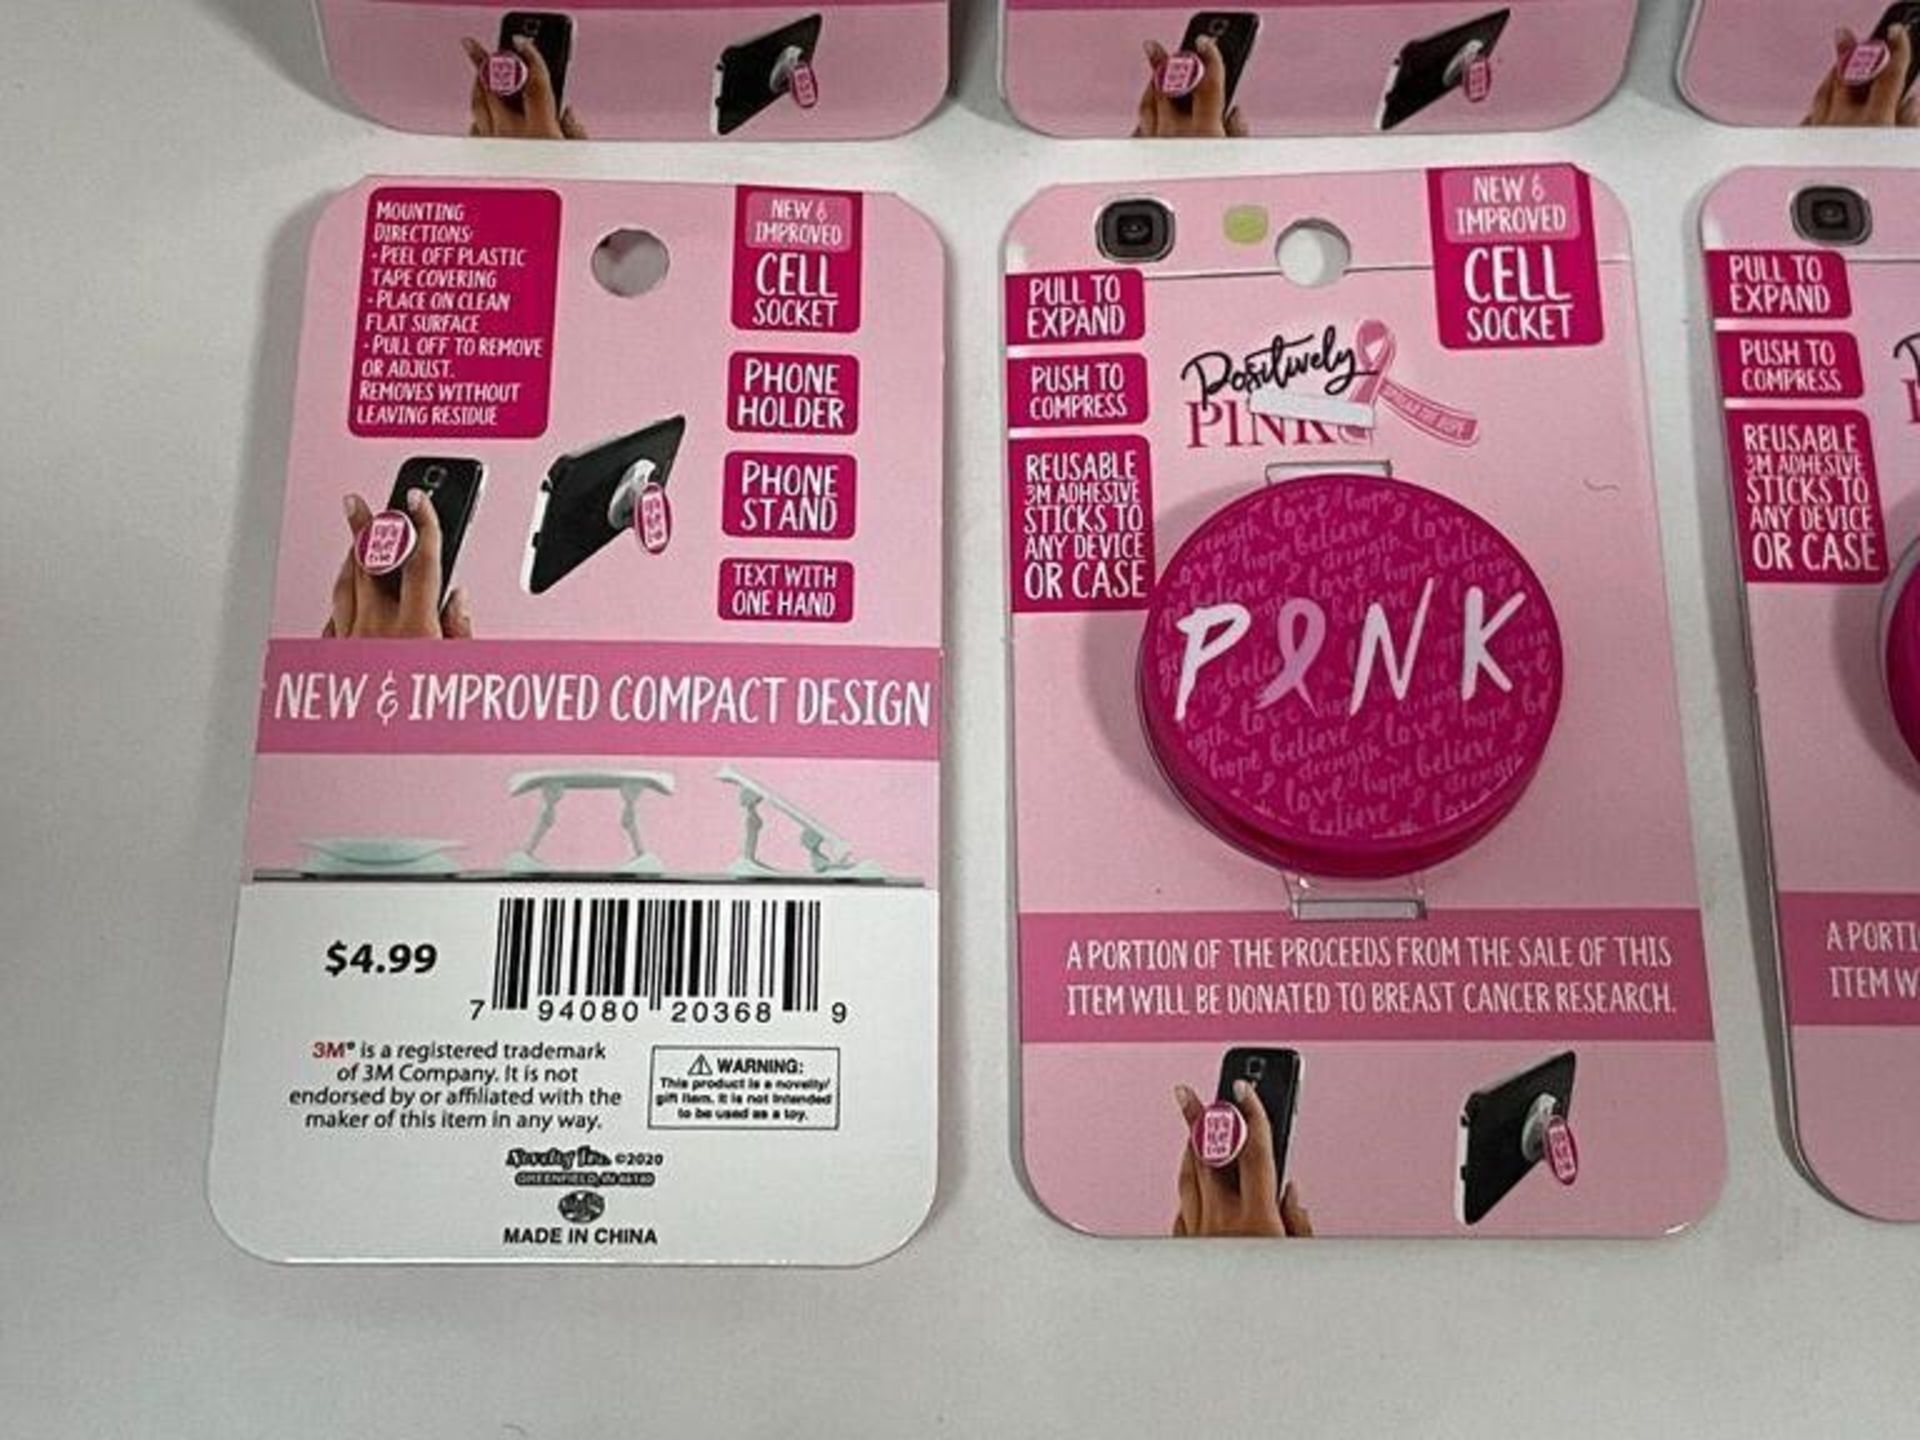 6 X BREAST CANCER PINK CELLPHONE POP UP SOCKETS. ATTACH TO THE BACK OF YOUR CELLPHONE AND POP UP TO - Image 4 of 4